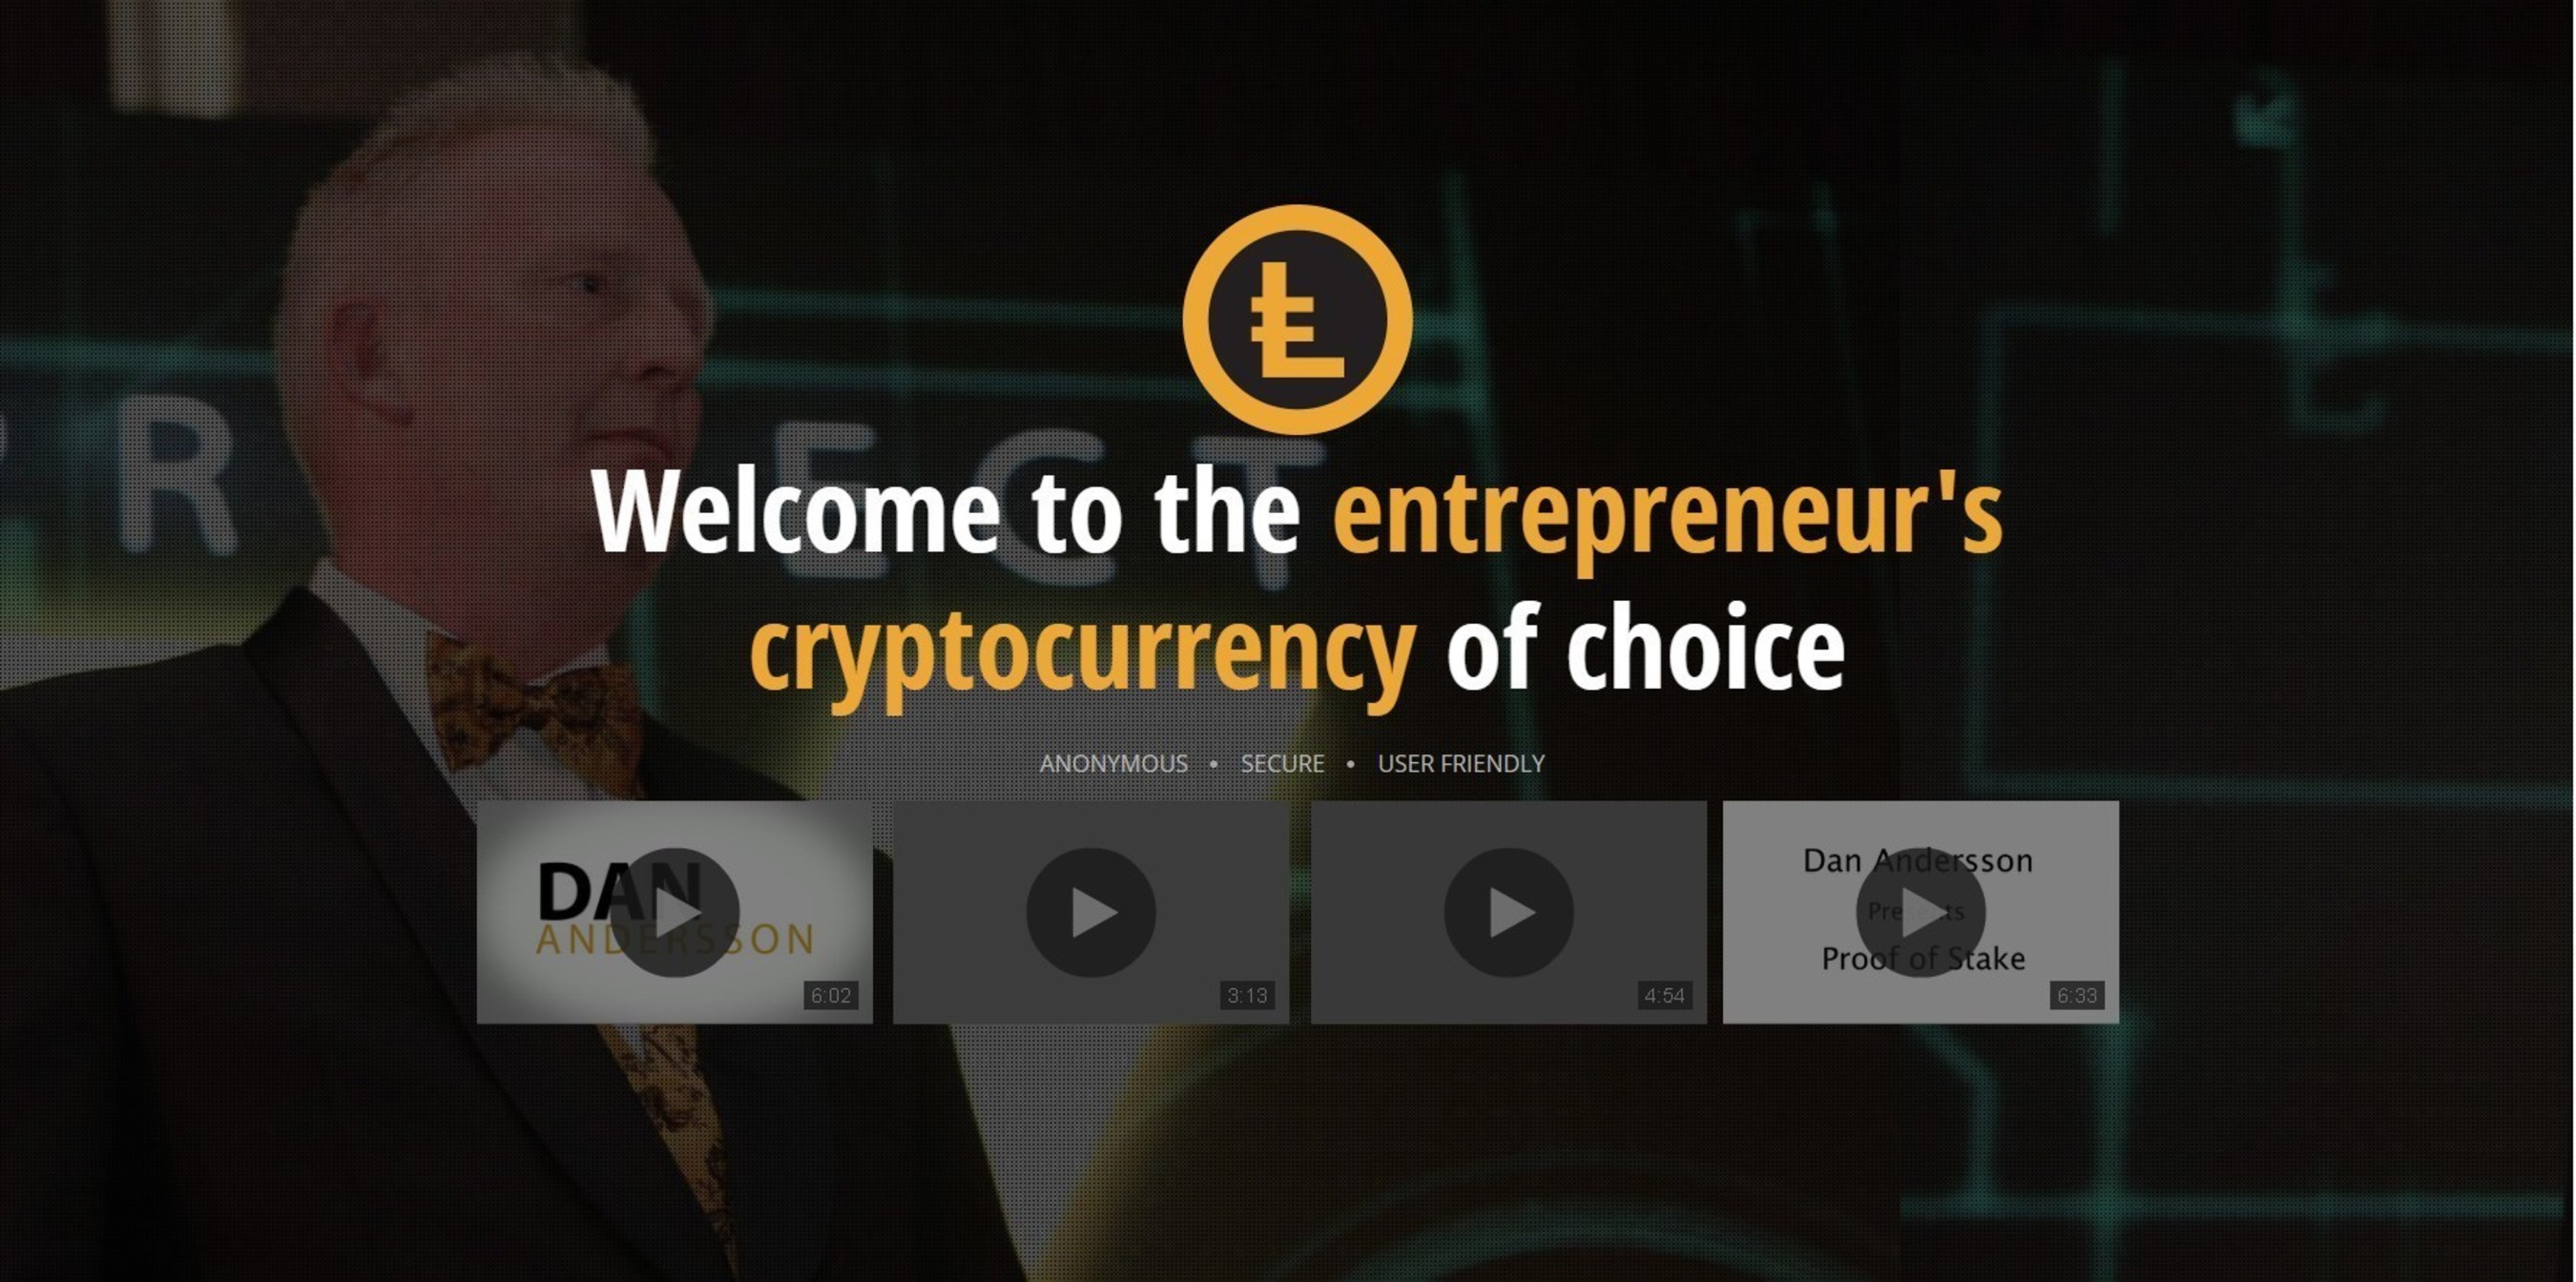 LEOcoin, the Global Cryptocurrency for Entrepreneurs, Releases White Paper